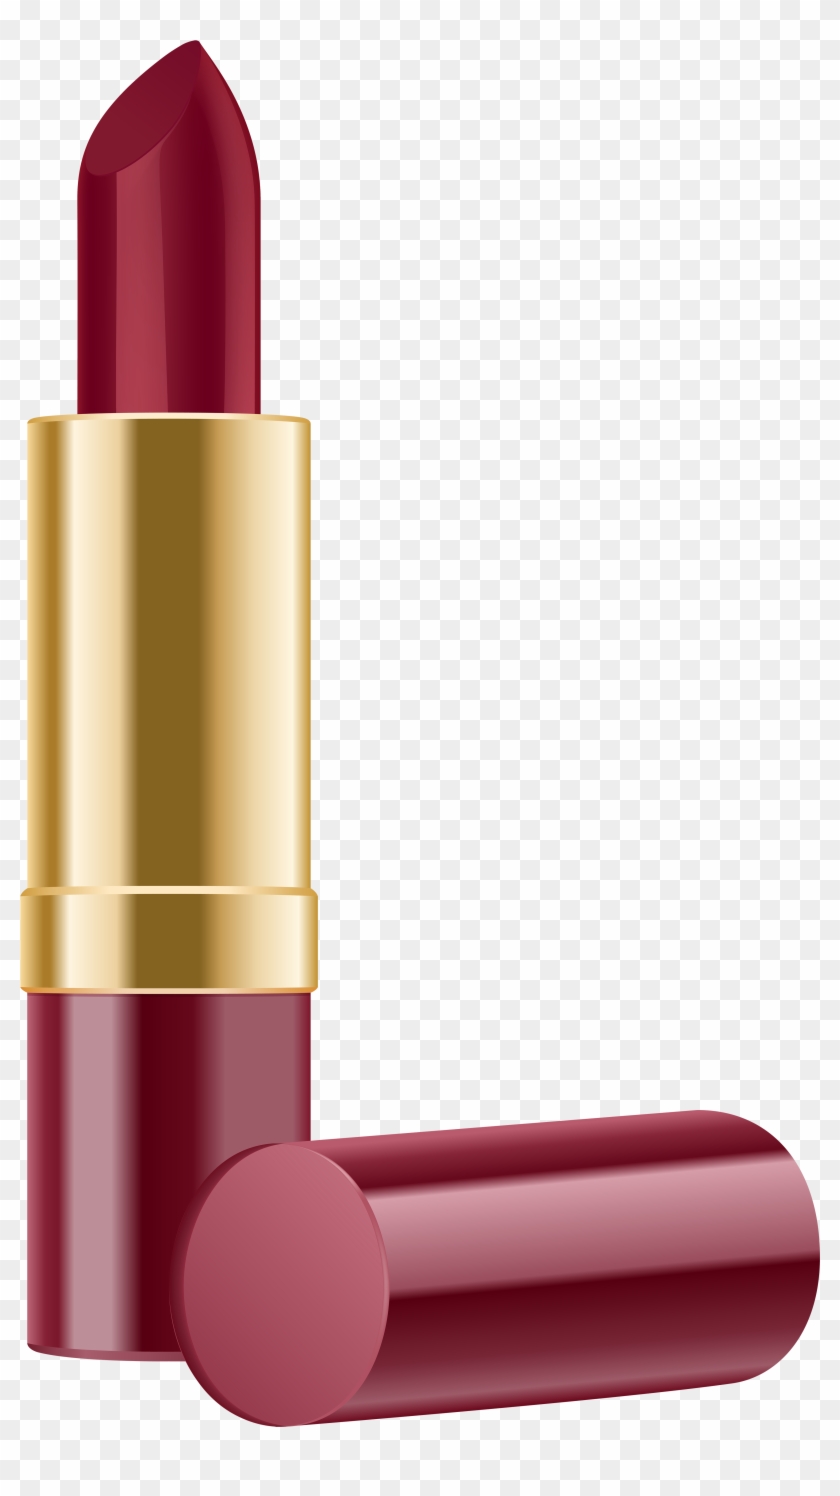 Red Lipstick Png Clip Art Image - Lipstick Clipart Png #165702